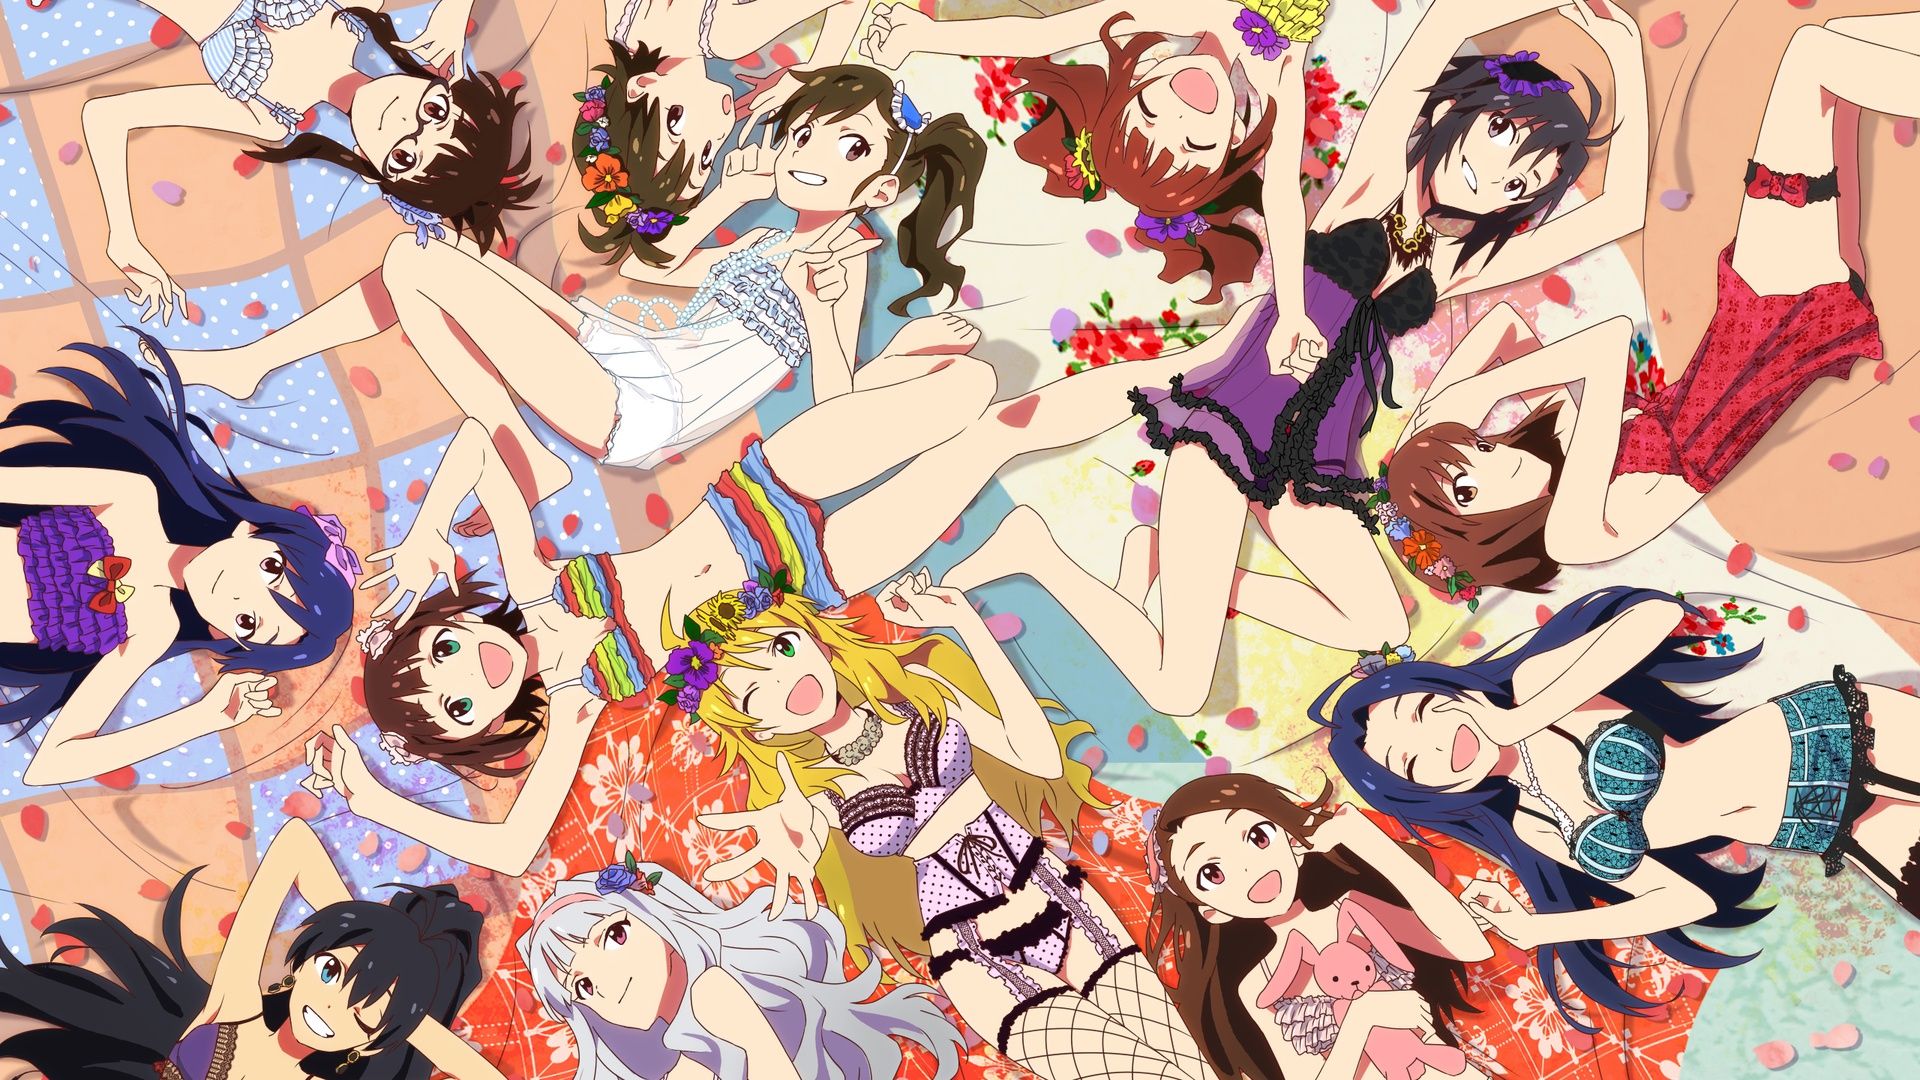 The Idolm@ster background